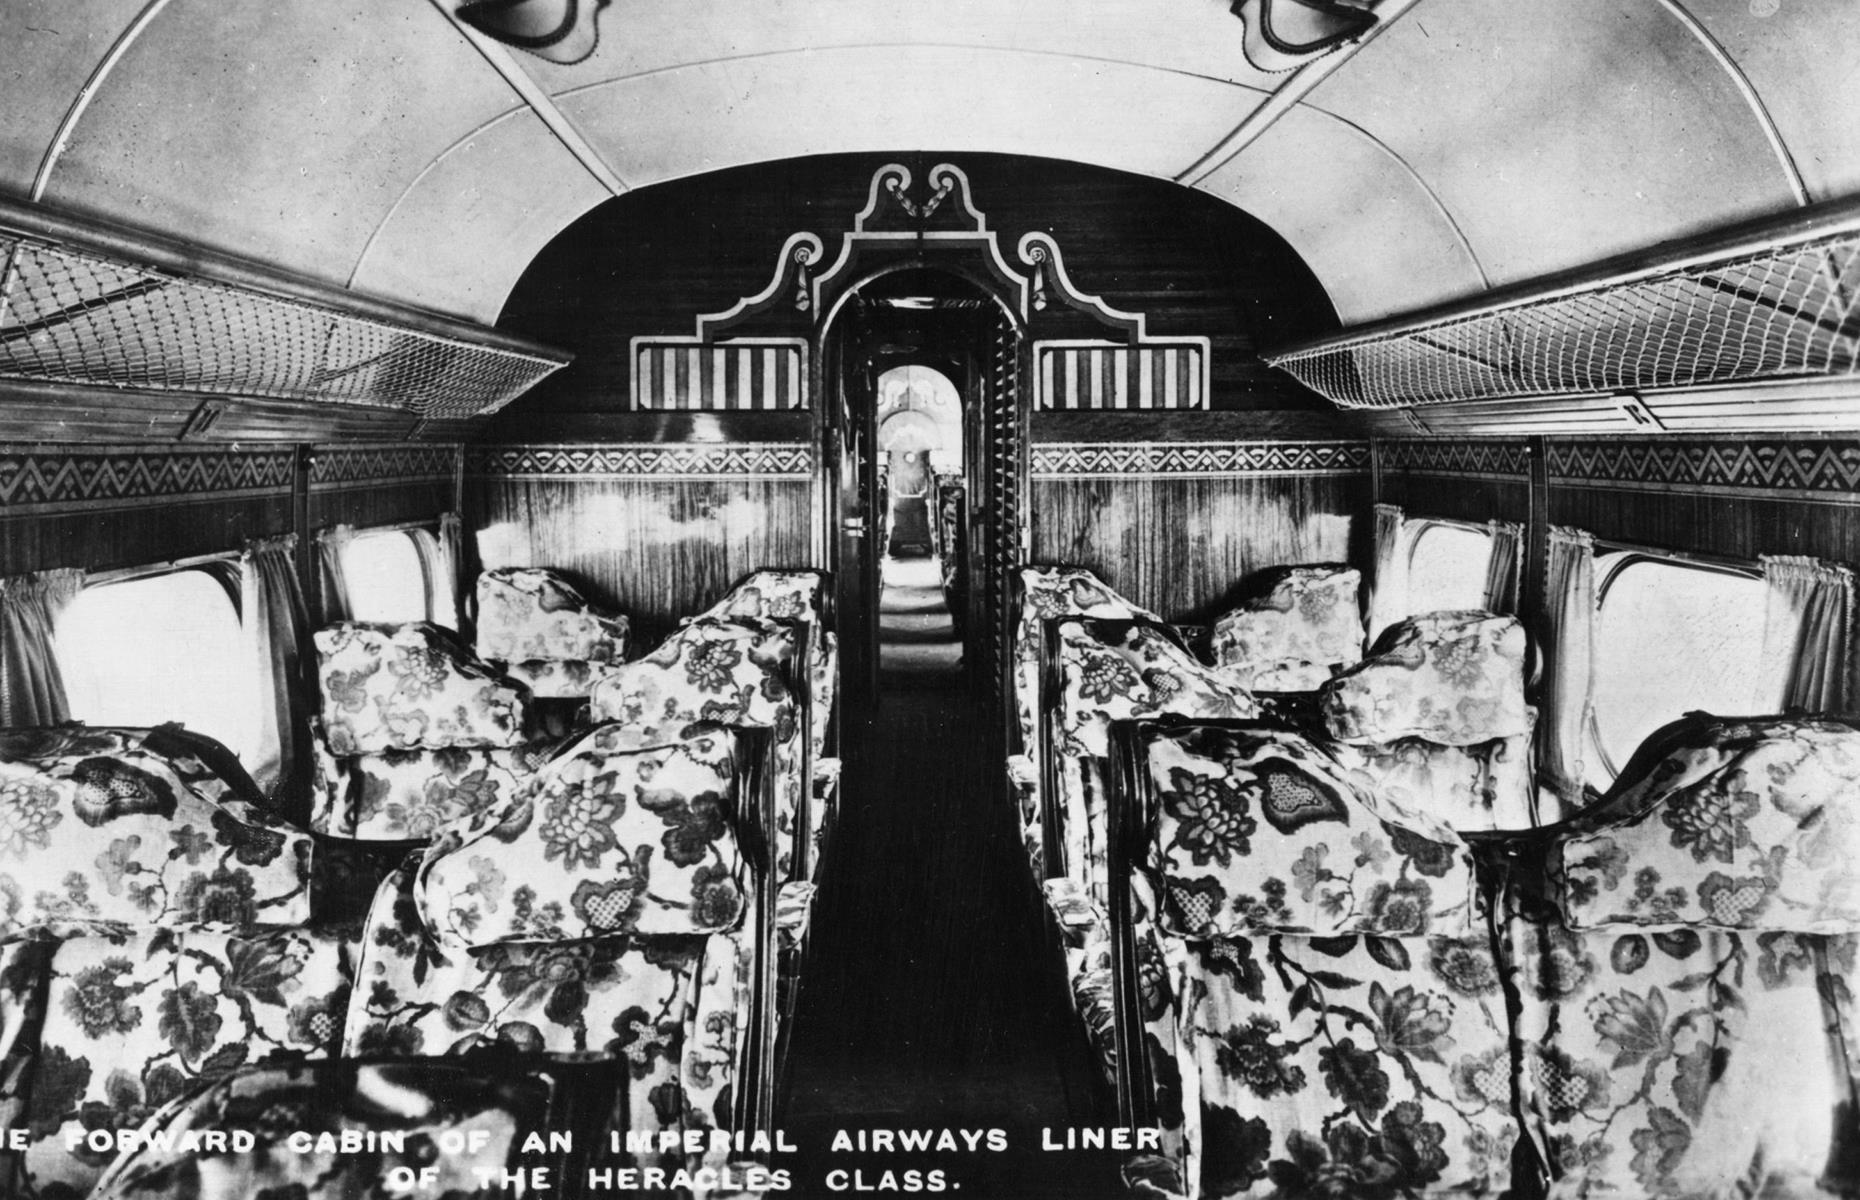 Commercial airlines did everything they could to make passengers feel comfortable. Alongside the help of attentive staff, 1930s passengers would be able to enjoy plush aircraft cabins worlds away from the no-frills set-up of the modern day. This Imperial Airways cabin, captured circa 1935, boasted pillowy floral seats, patterned walls and curtains with decorative trim. This particular plane was generally used on a Paris–London route throughout this decade.